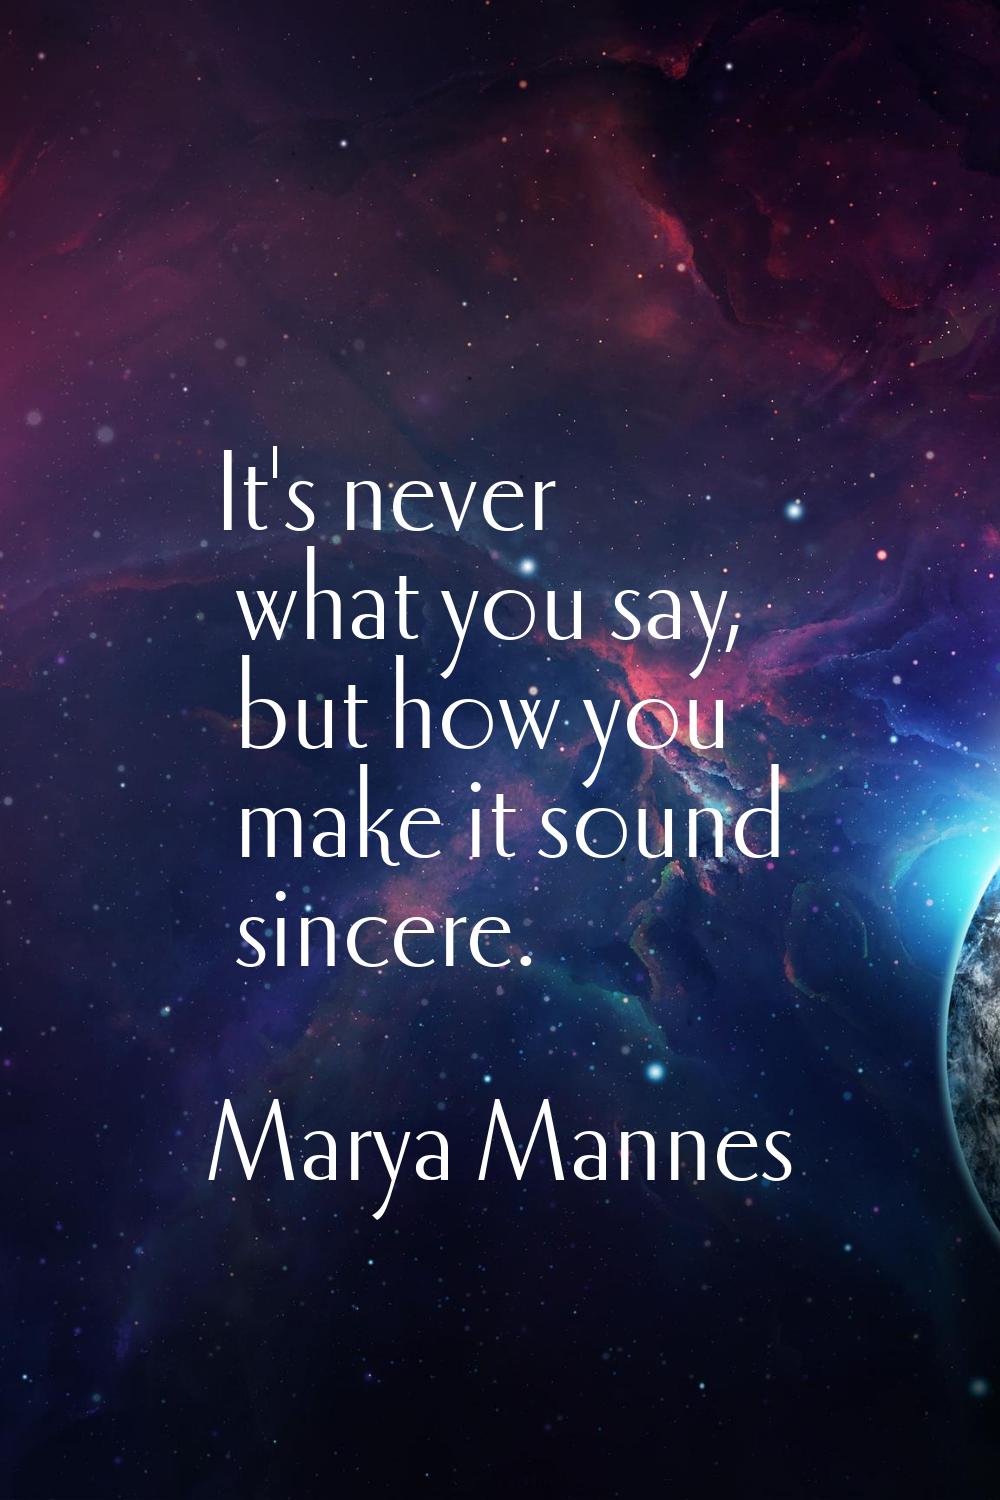 It's never what you say, but how you make it sound sincere.